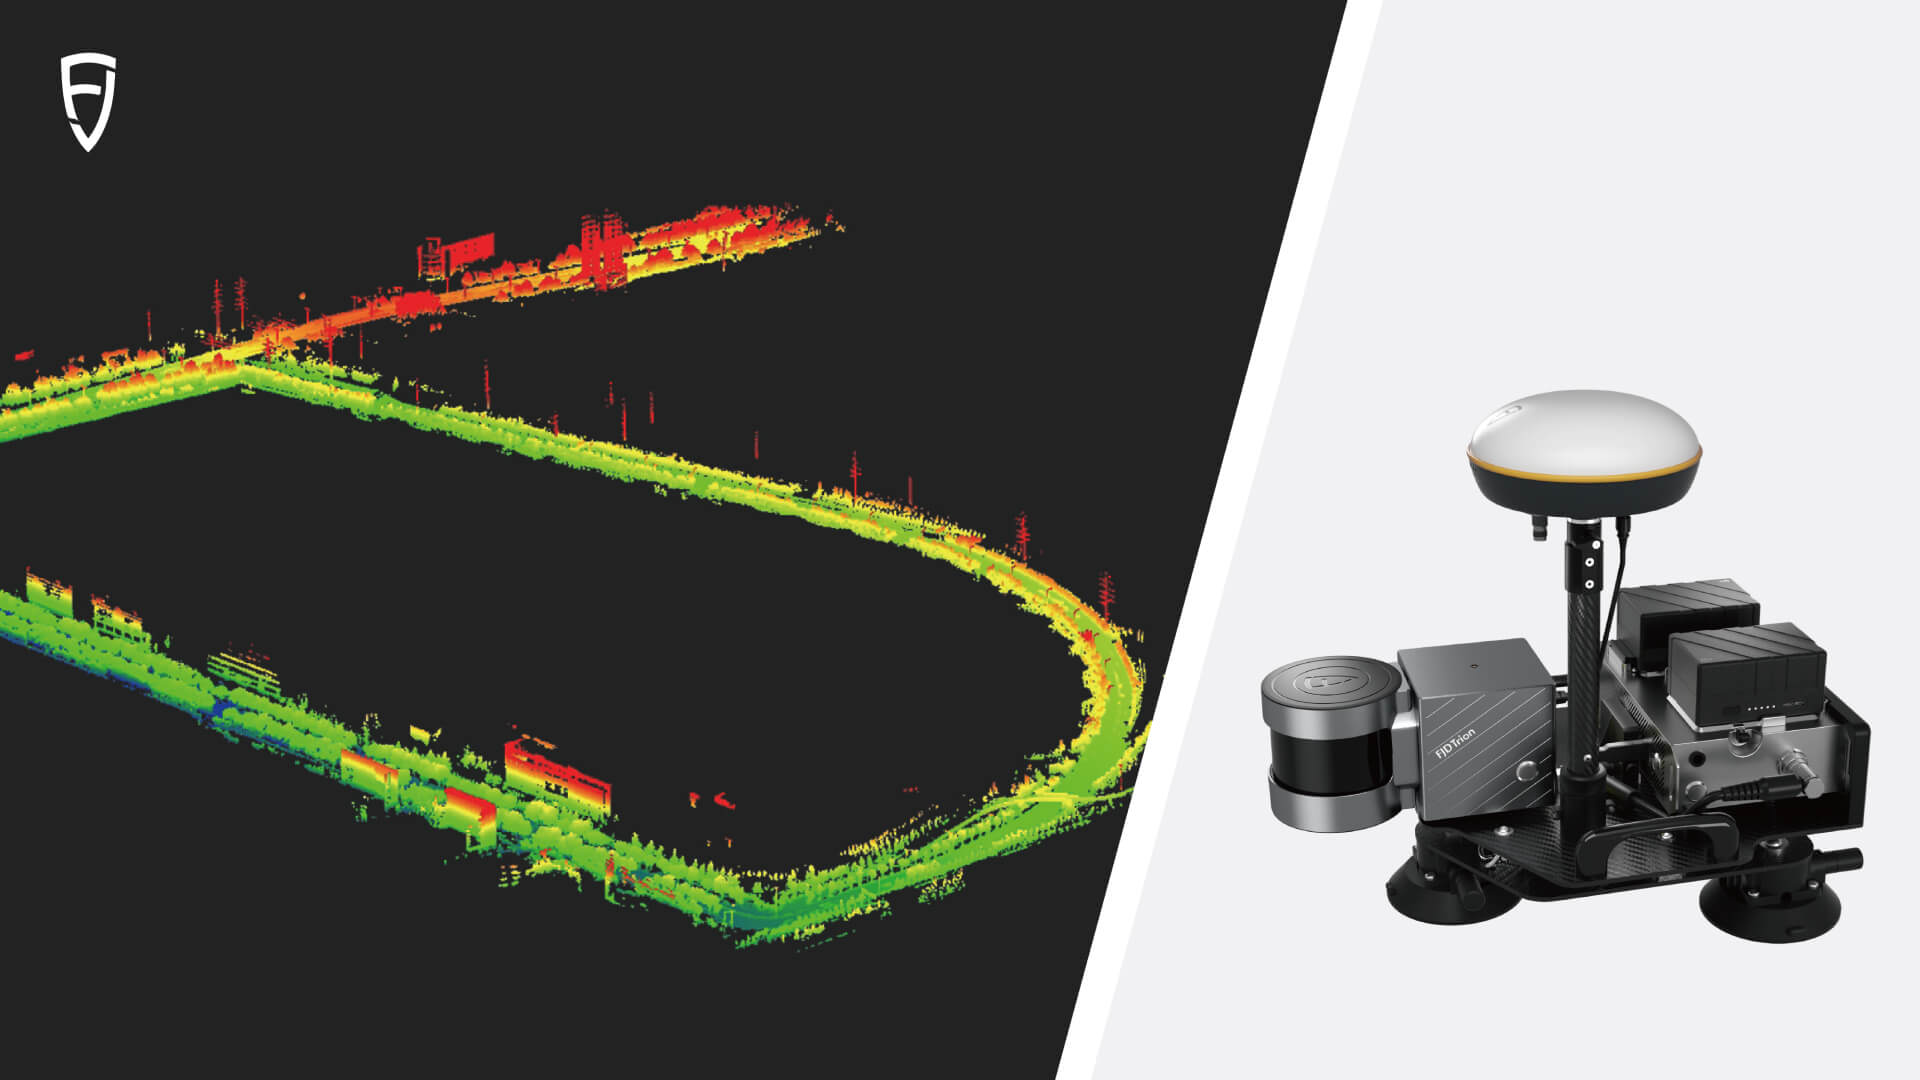 Combine the carmount with RTK to showcase exceptional data-gathering capabilities and generate precise geo-referenced point clouds with centimeter-level accuracy.